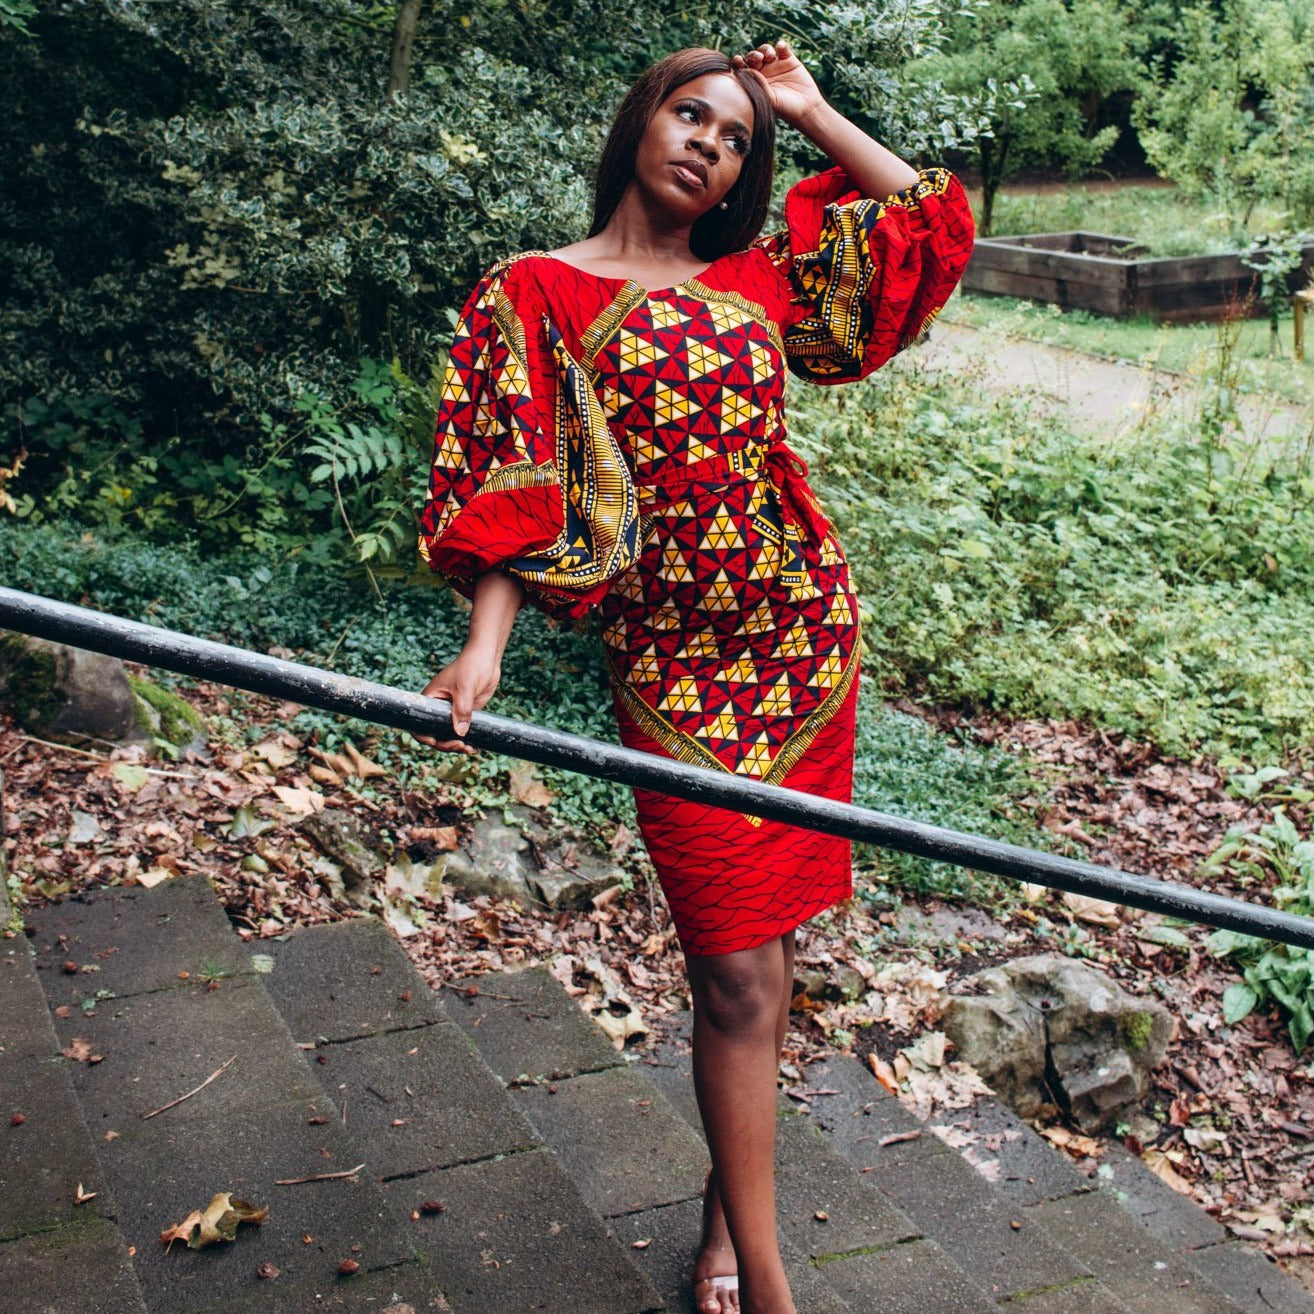 Ankara wax print African geo-shaped Triangle  pattern in red, yellow and black on long  three quarter ballooned sleeves, closed neckline, knee high body hugging pencil dress with belt feature.